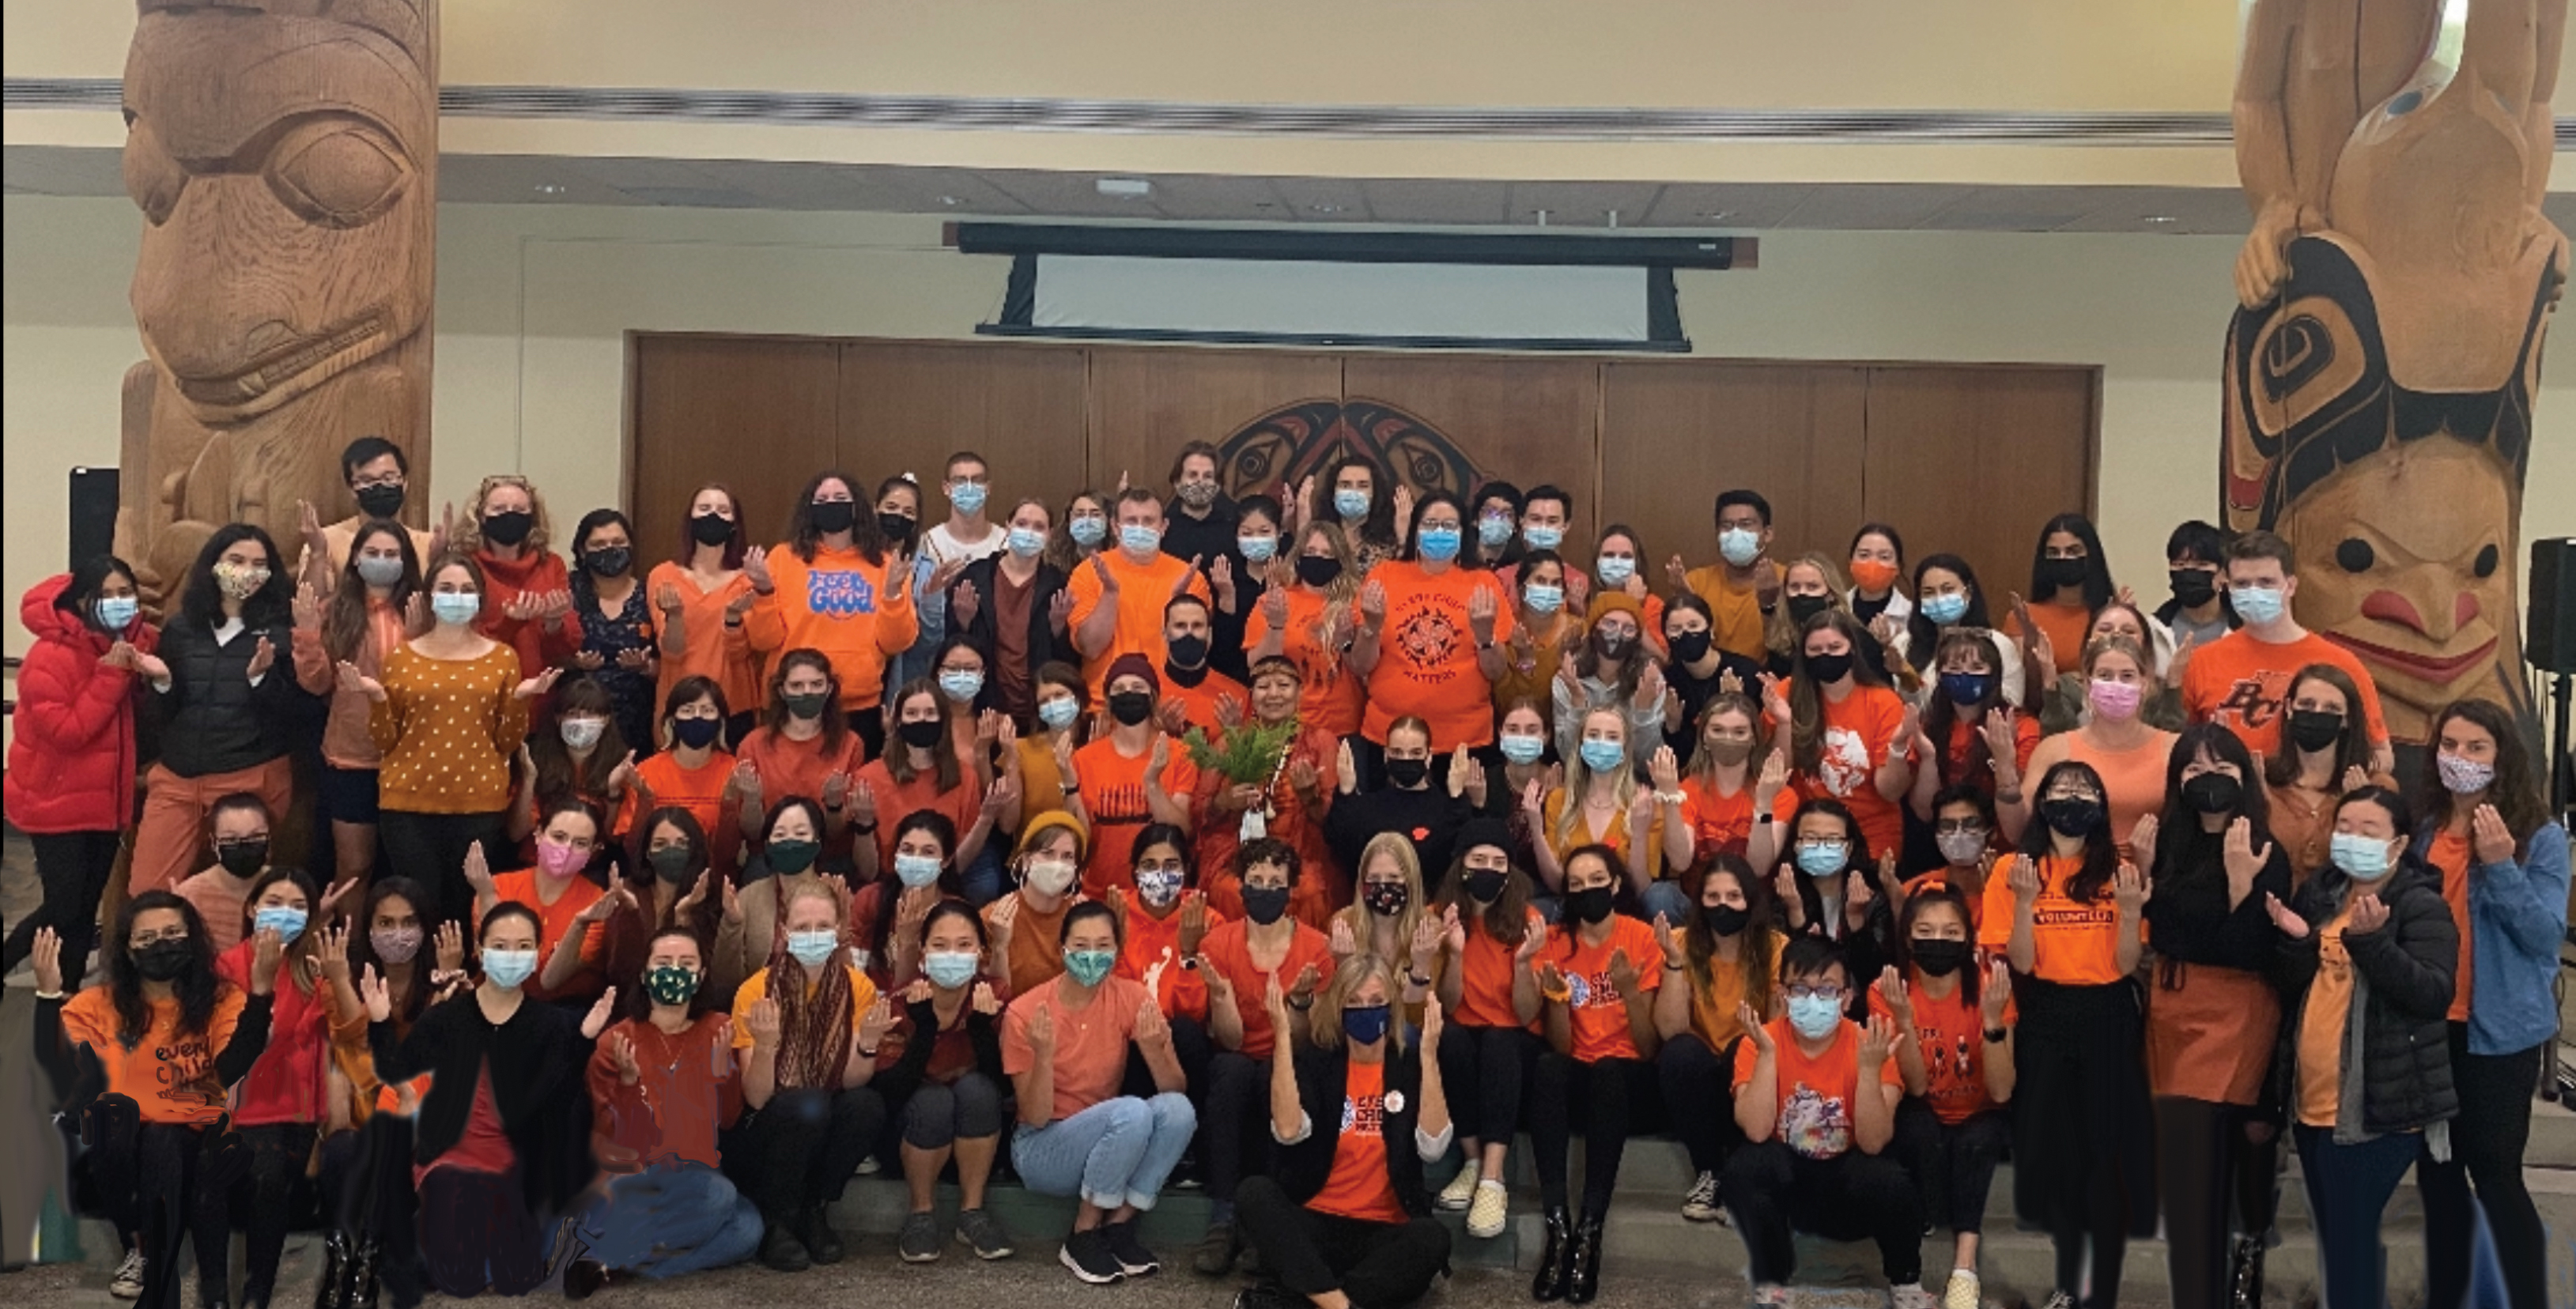 Orange Shirt Day 2021 at the First Nations House of Learning